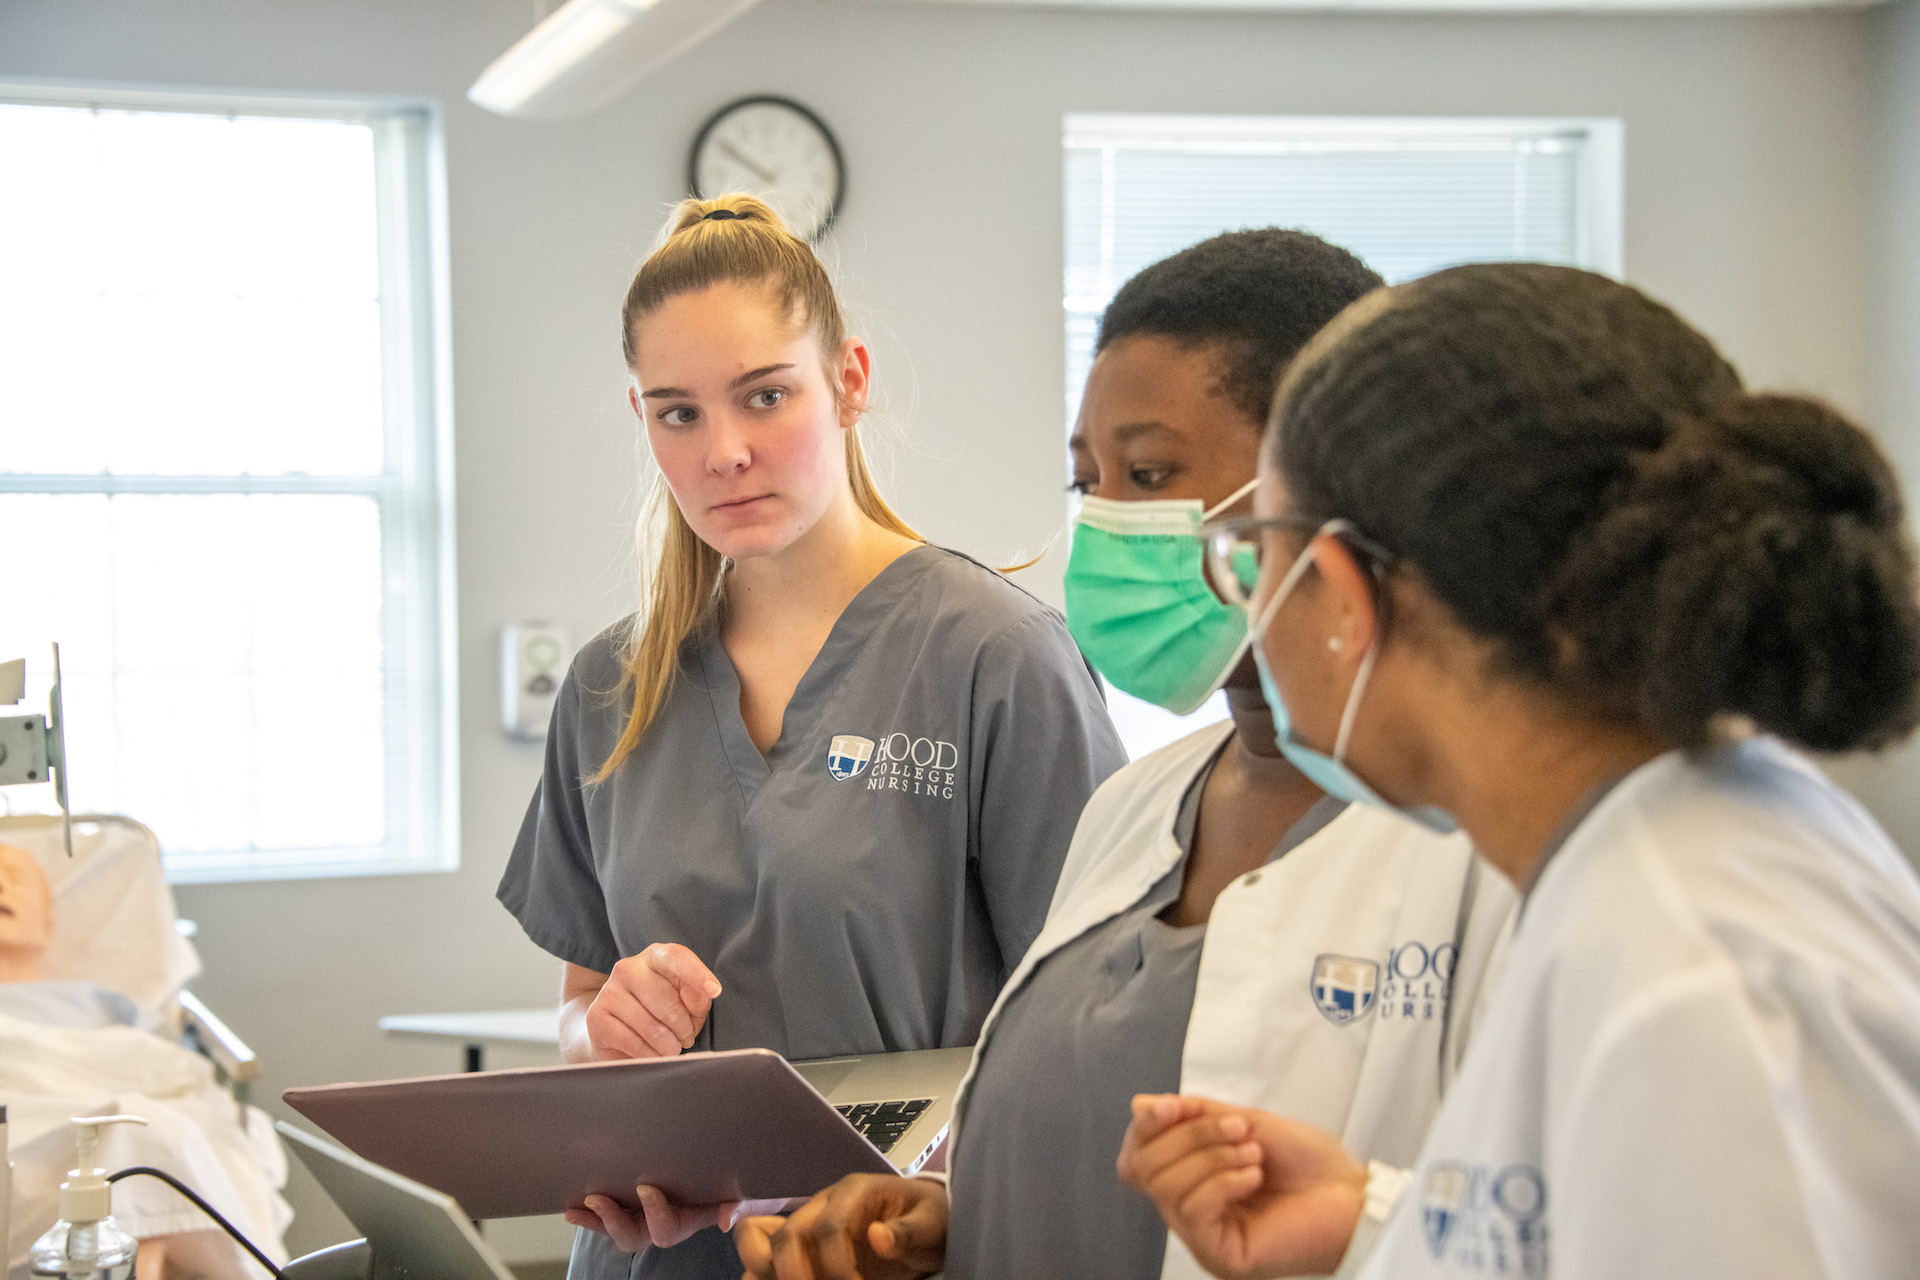 Hood nursing students gather to discuss a patient's symptoms in a simulated lab.